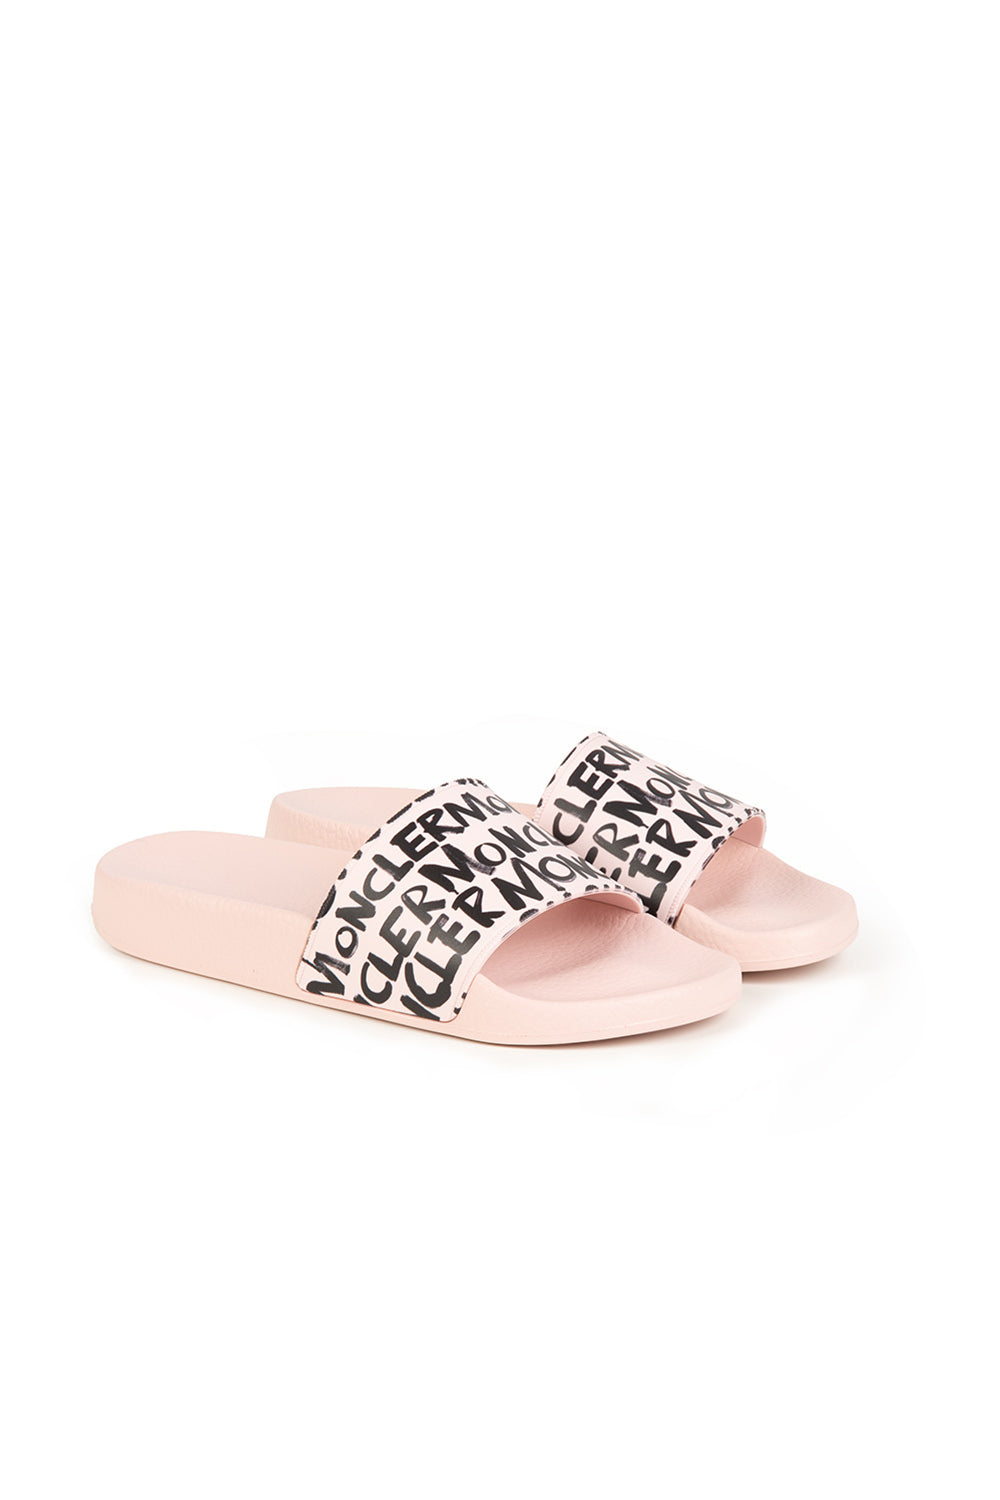 Moncler Jeanne Women’s Sandals Pink - Front View